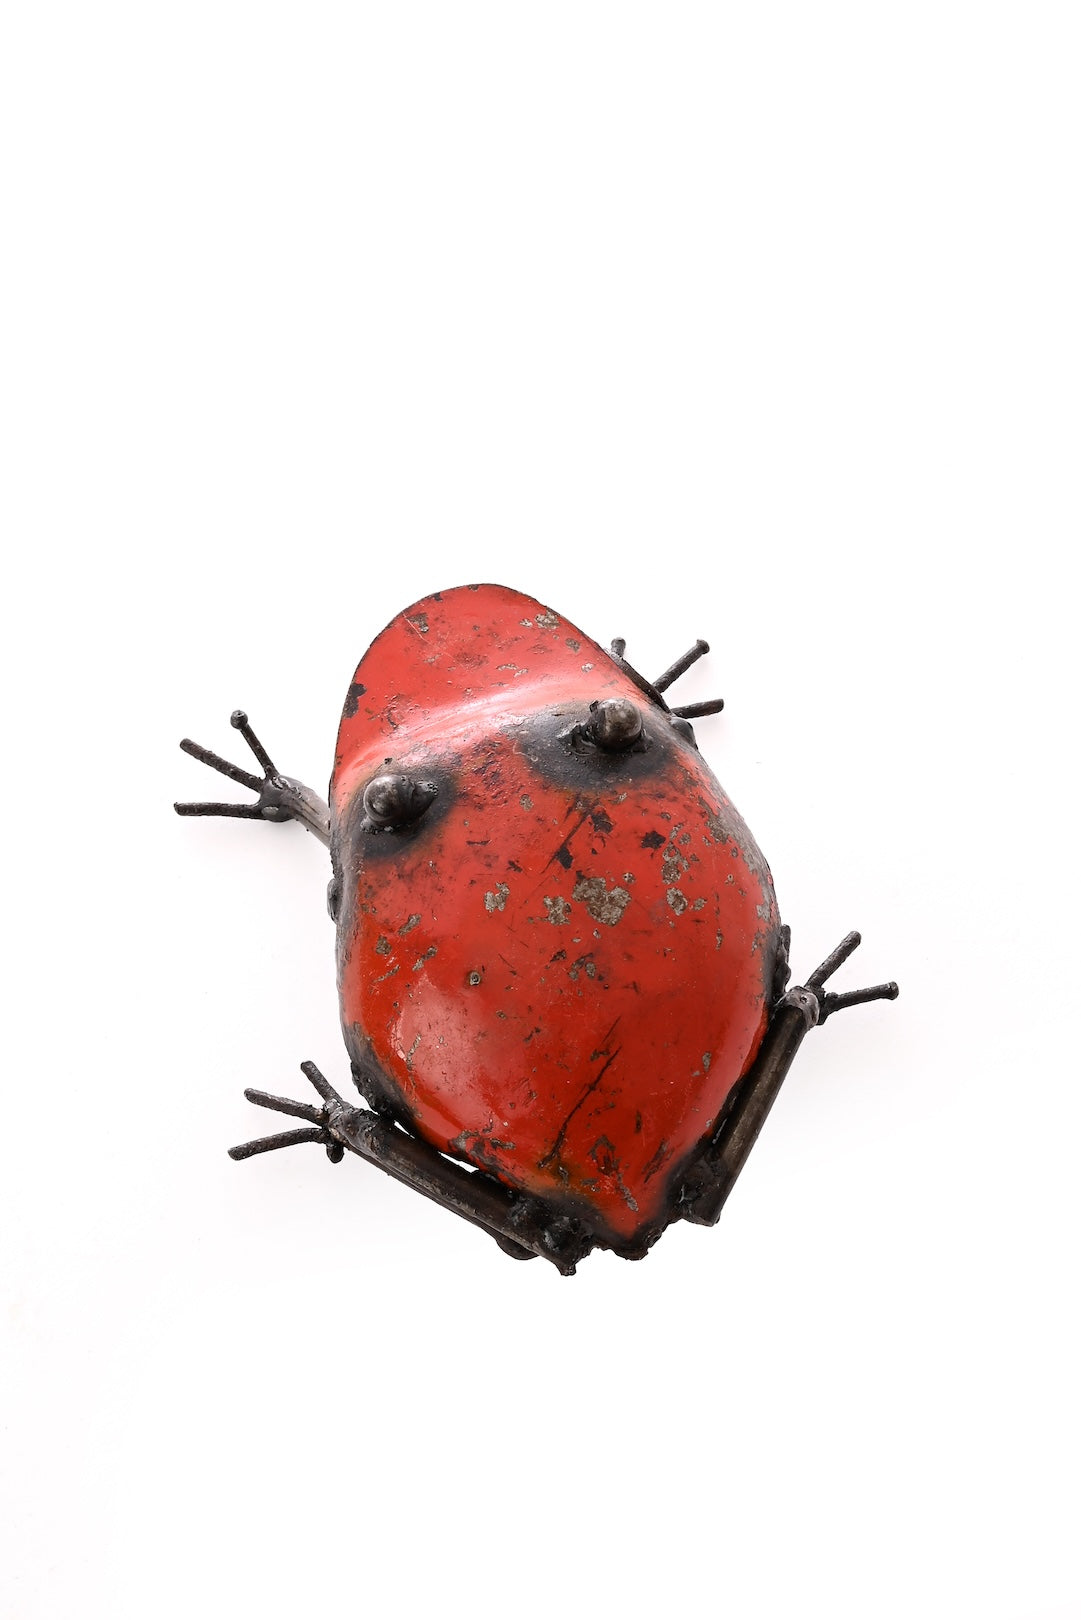 Recycled Oil Drum Frog - Red